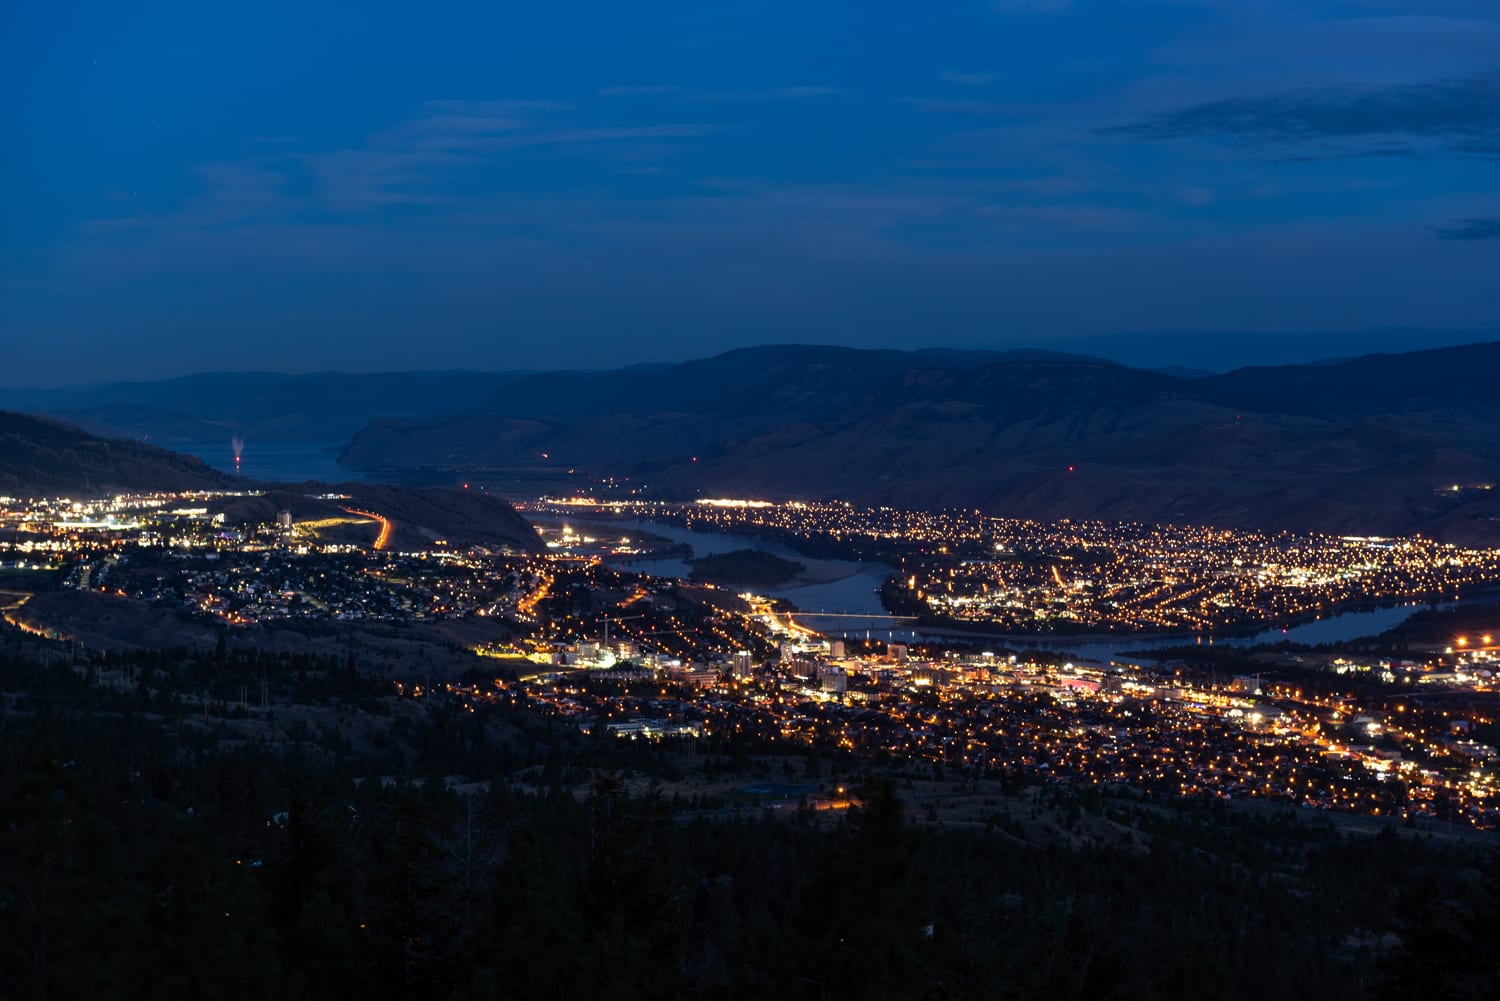 Kamloops City Aerial night sky with mountains and city with bright lights